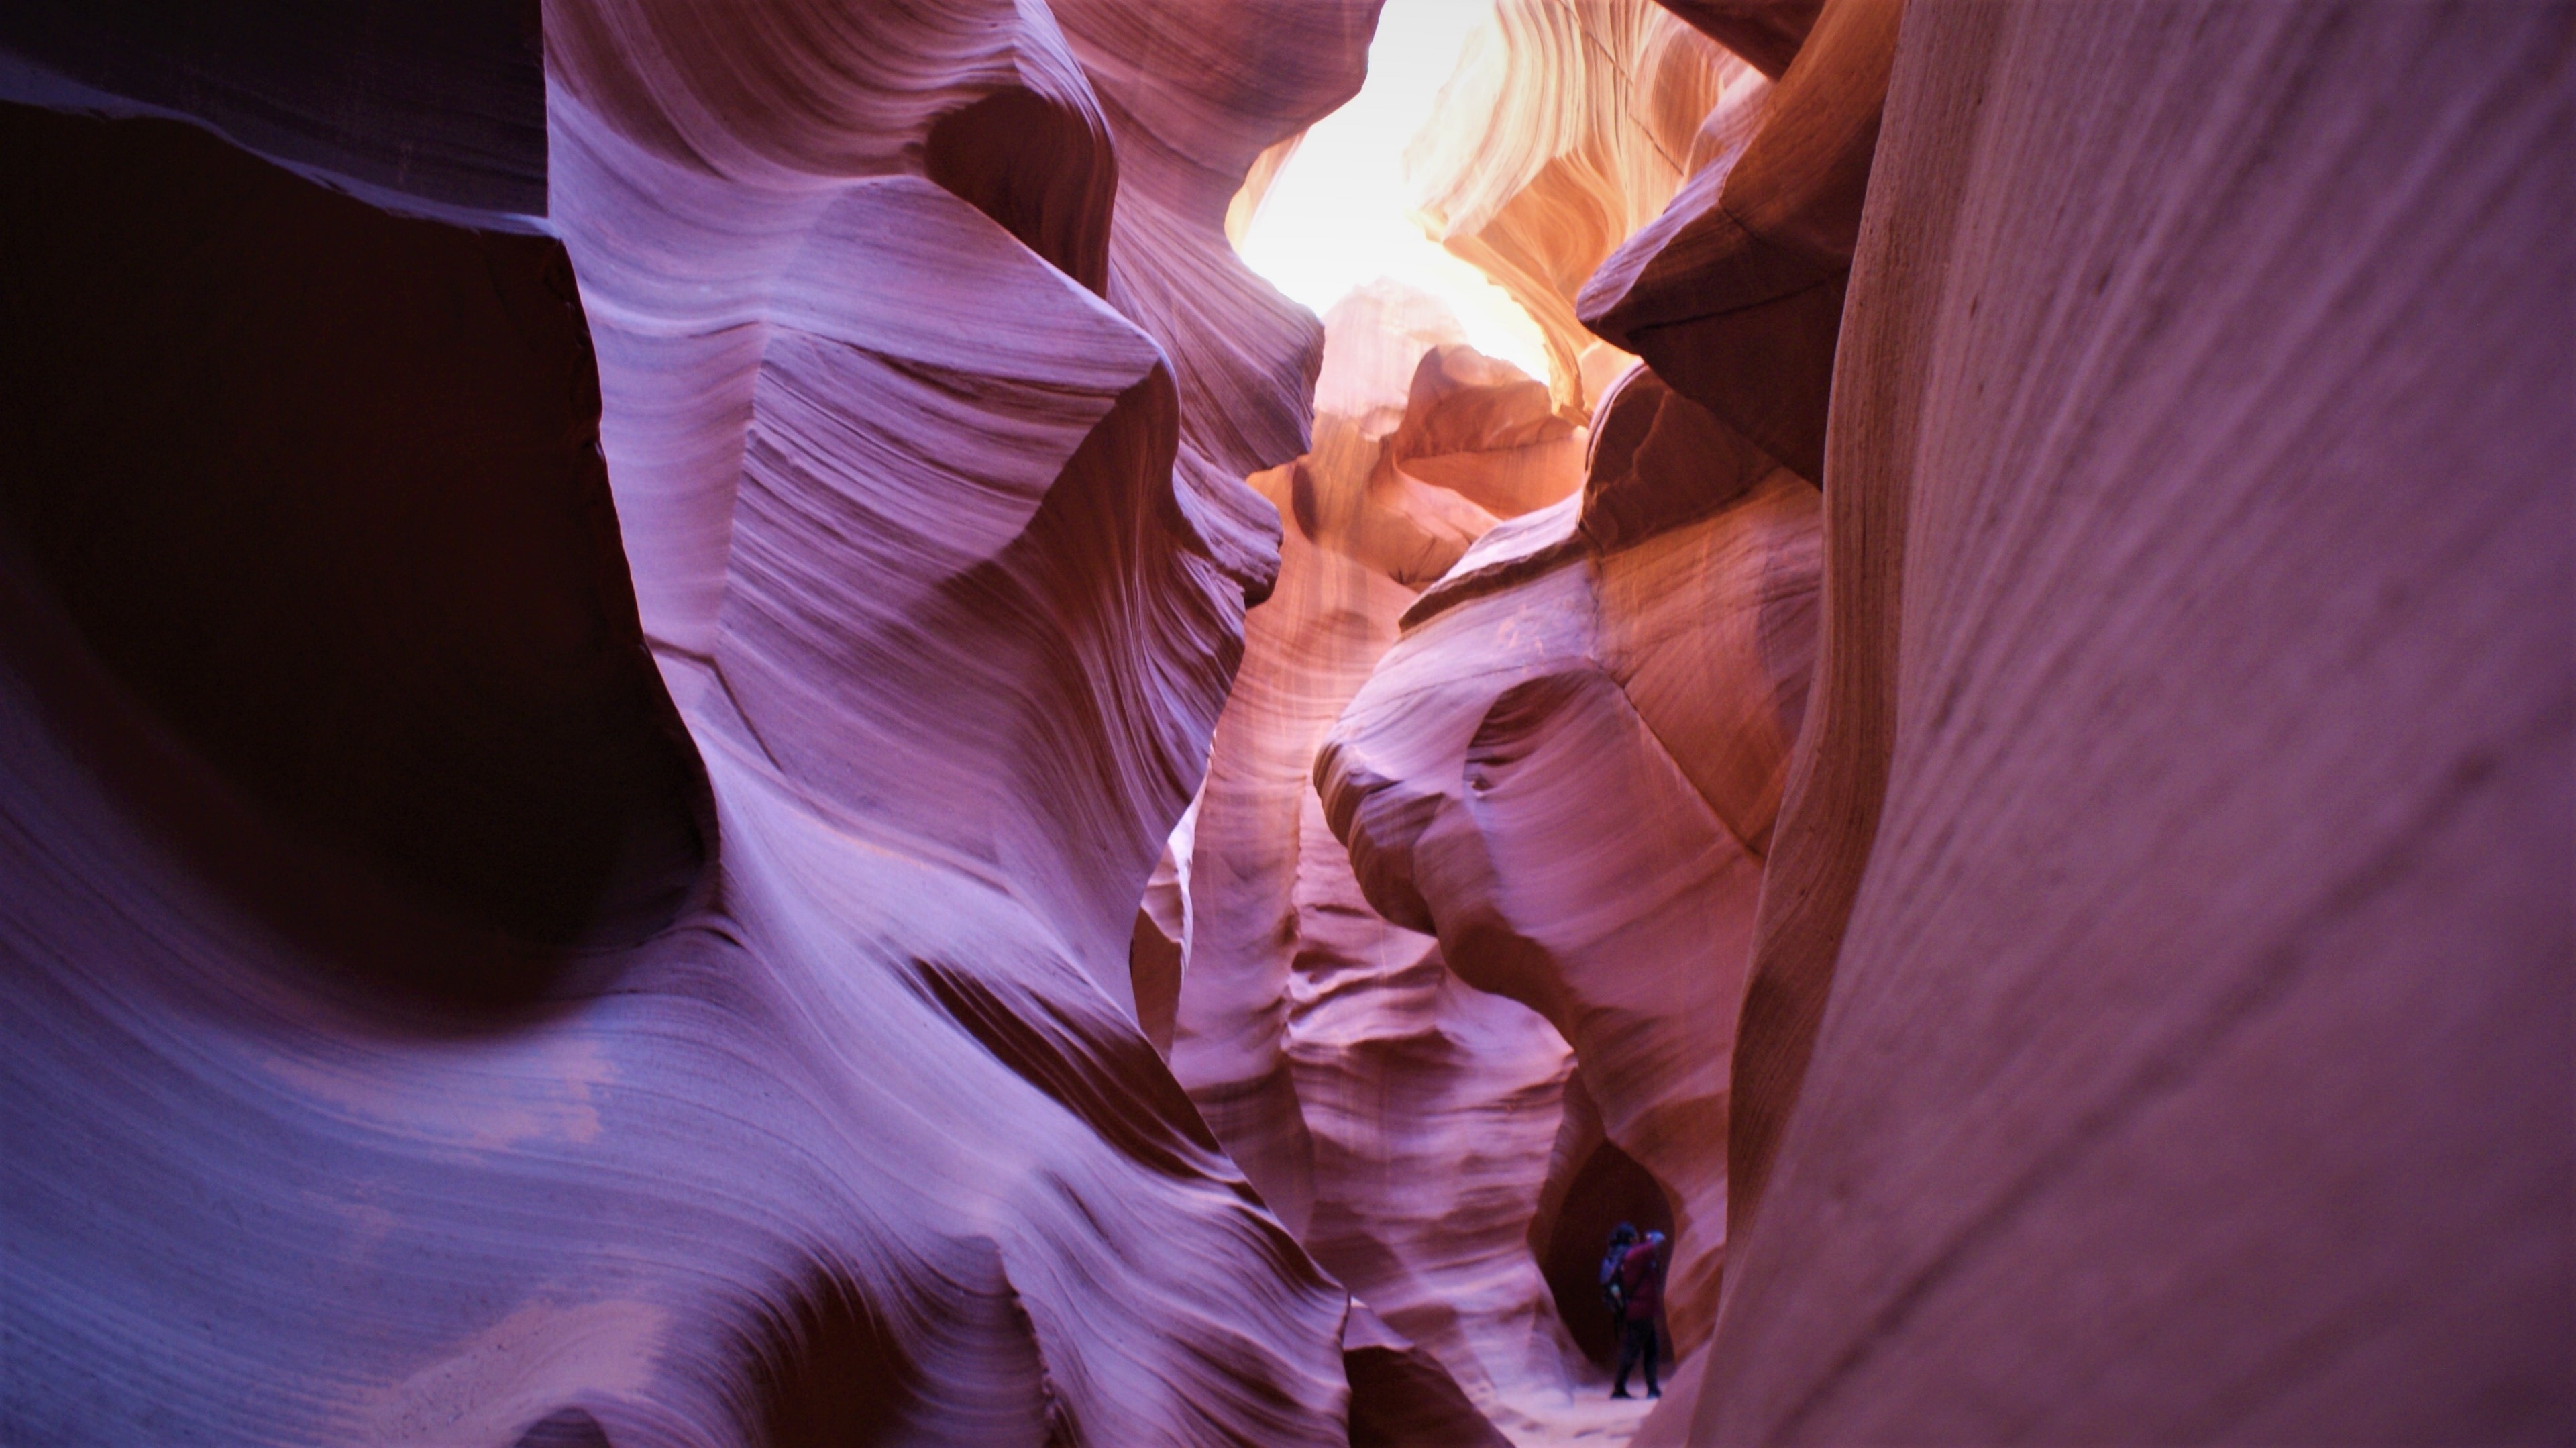 Stunning landscape, beautiful colors, amazing earth shots. Lower Antelope Canyon is a gem everyone should come see. Make sure you book a tour in advance and check the weather in case of flash flooding. We came here in the Fall and had the most amazing time exploring this beauty. #Adventure #antelopecanyon #landscape #nature #travel #tourism #tours #pagearizona #roadtrip #colorful #sandstonewalls #earthshots #wonder 